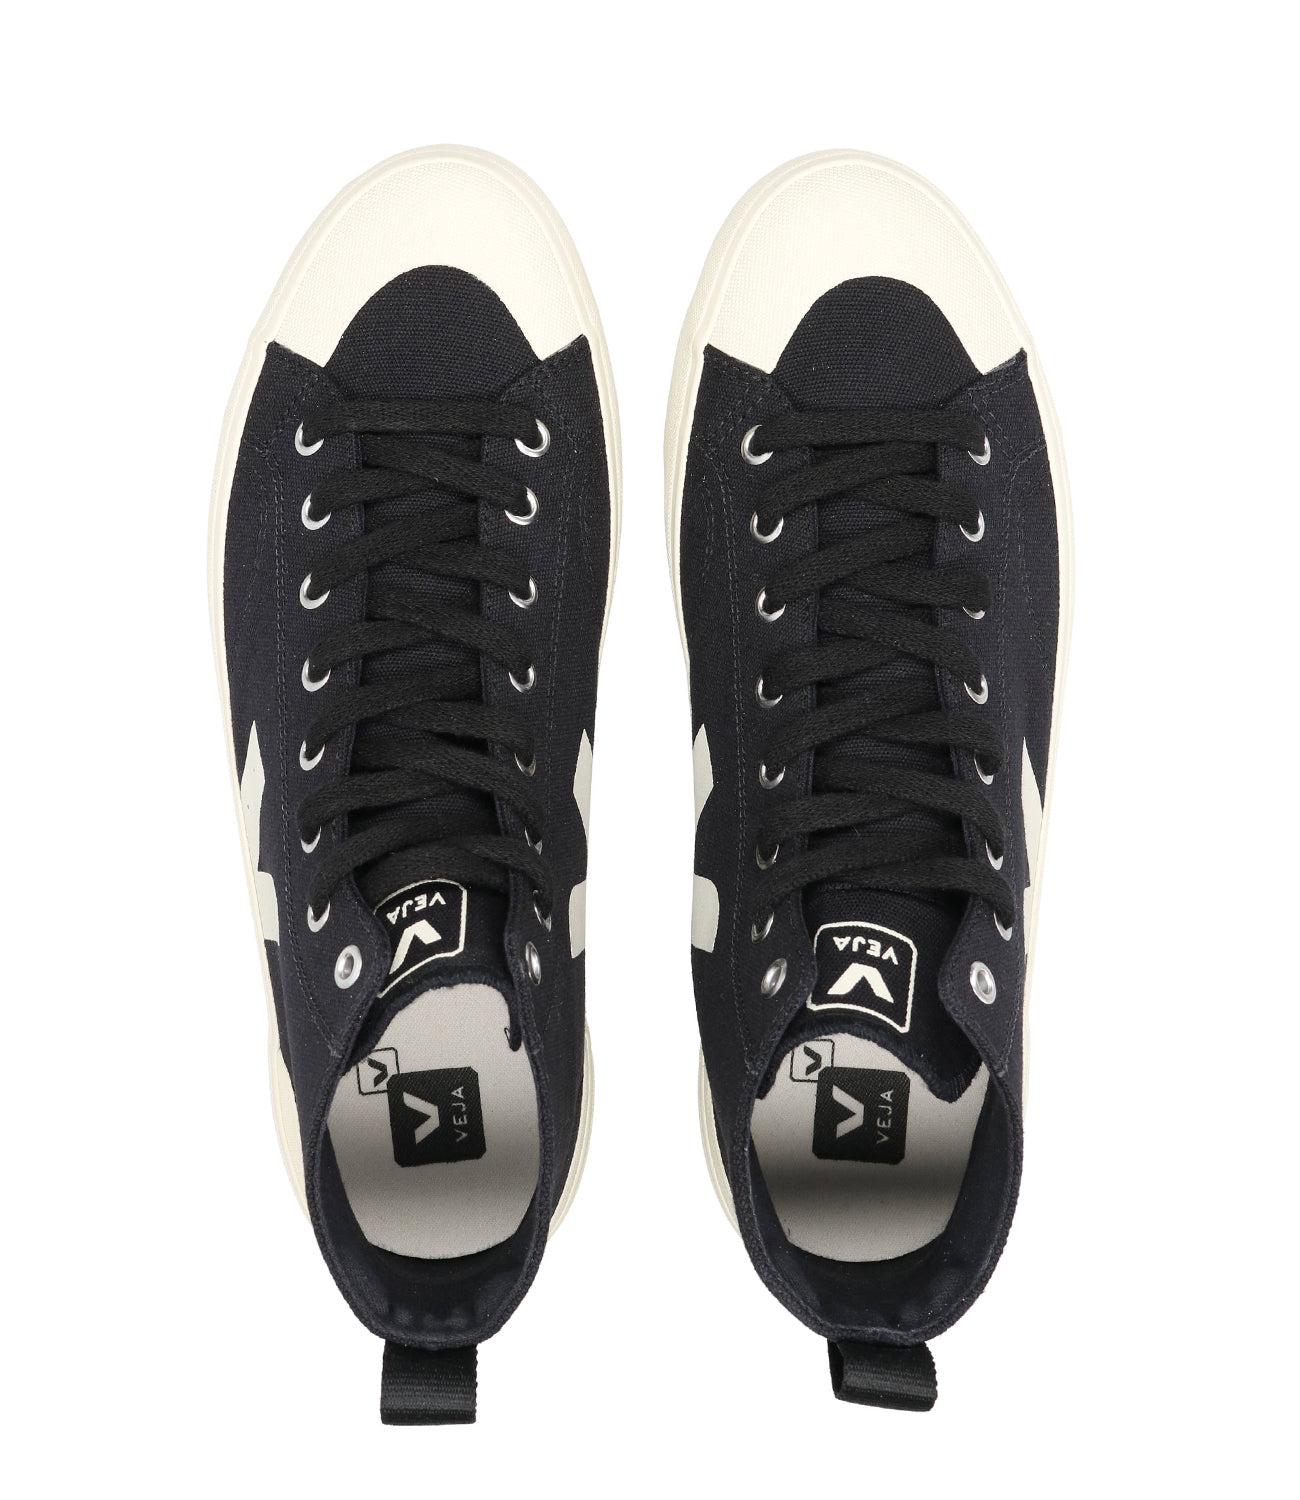 Veja | High Sneakers Black and White